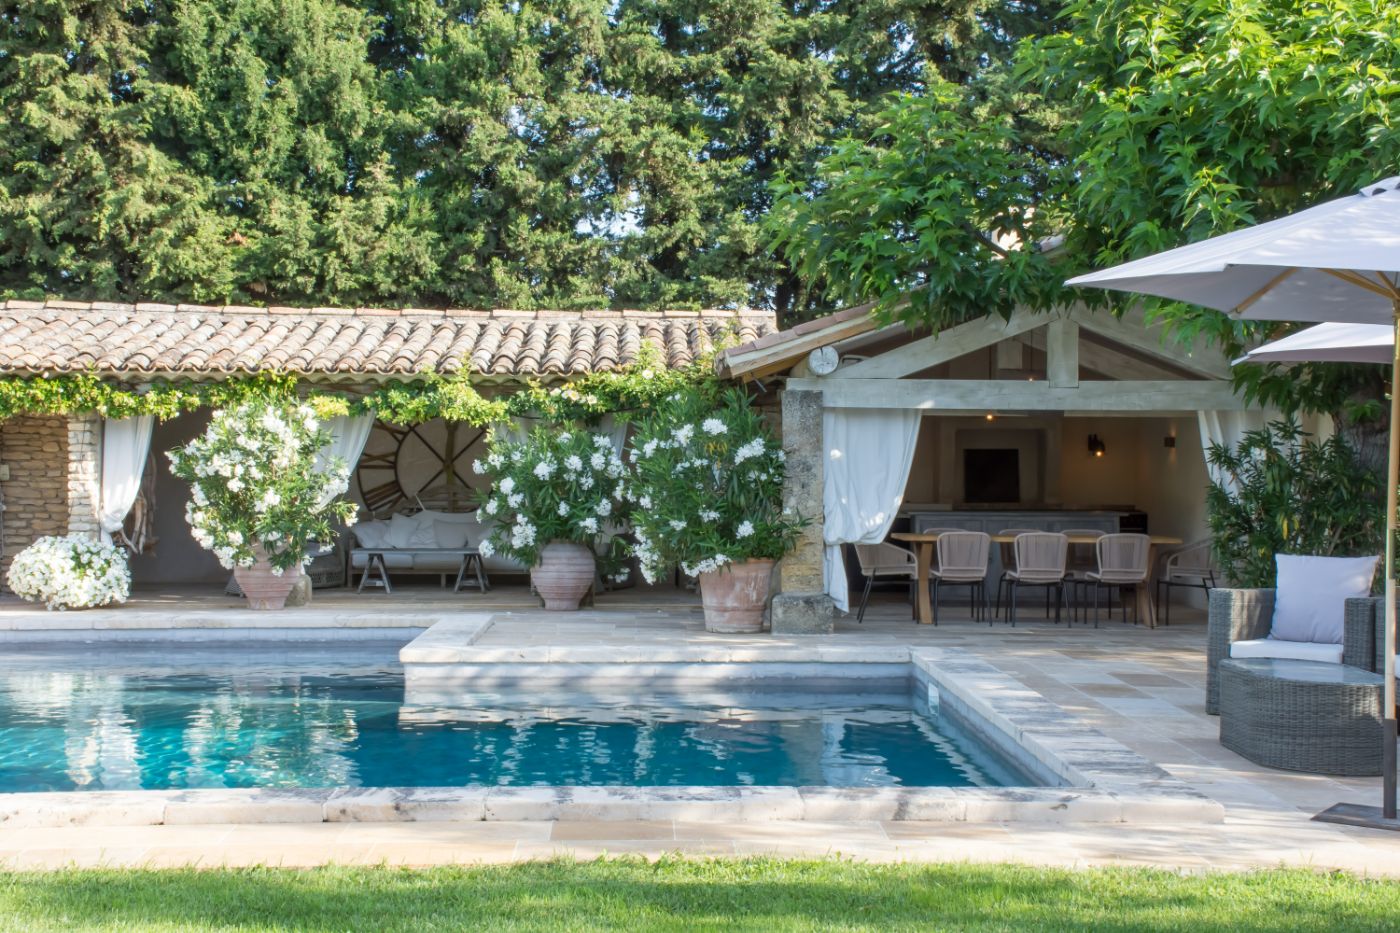 The poolhouse at La Jolie Oppede.